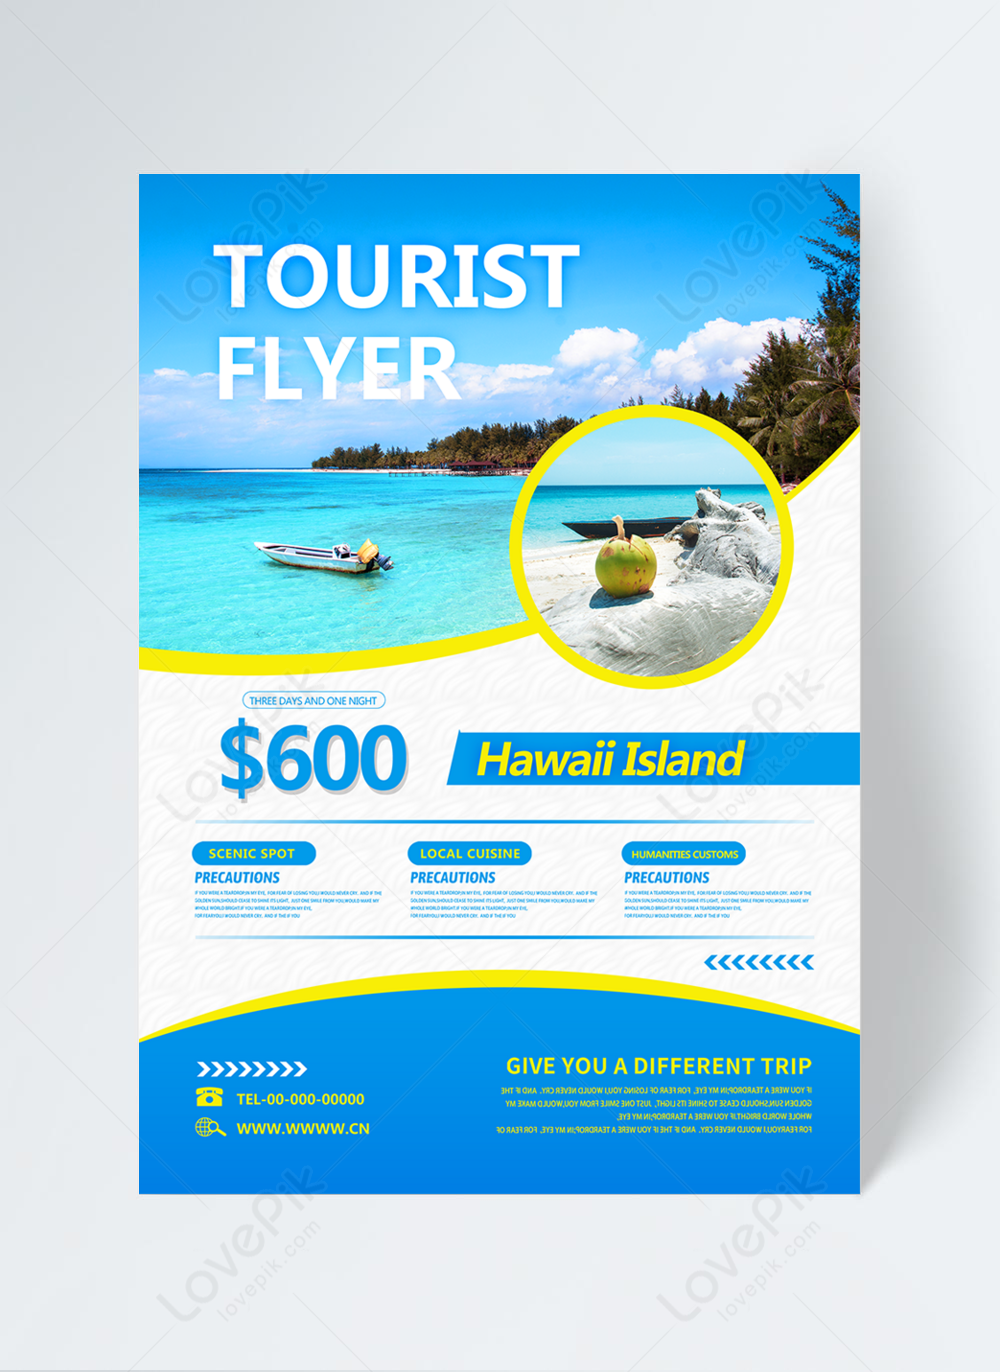 Fashion tourist attraction flyer template image_picture free Intended For Island Brochure Template